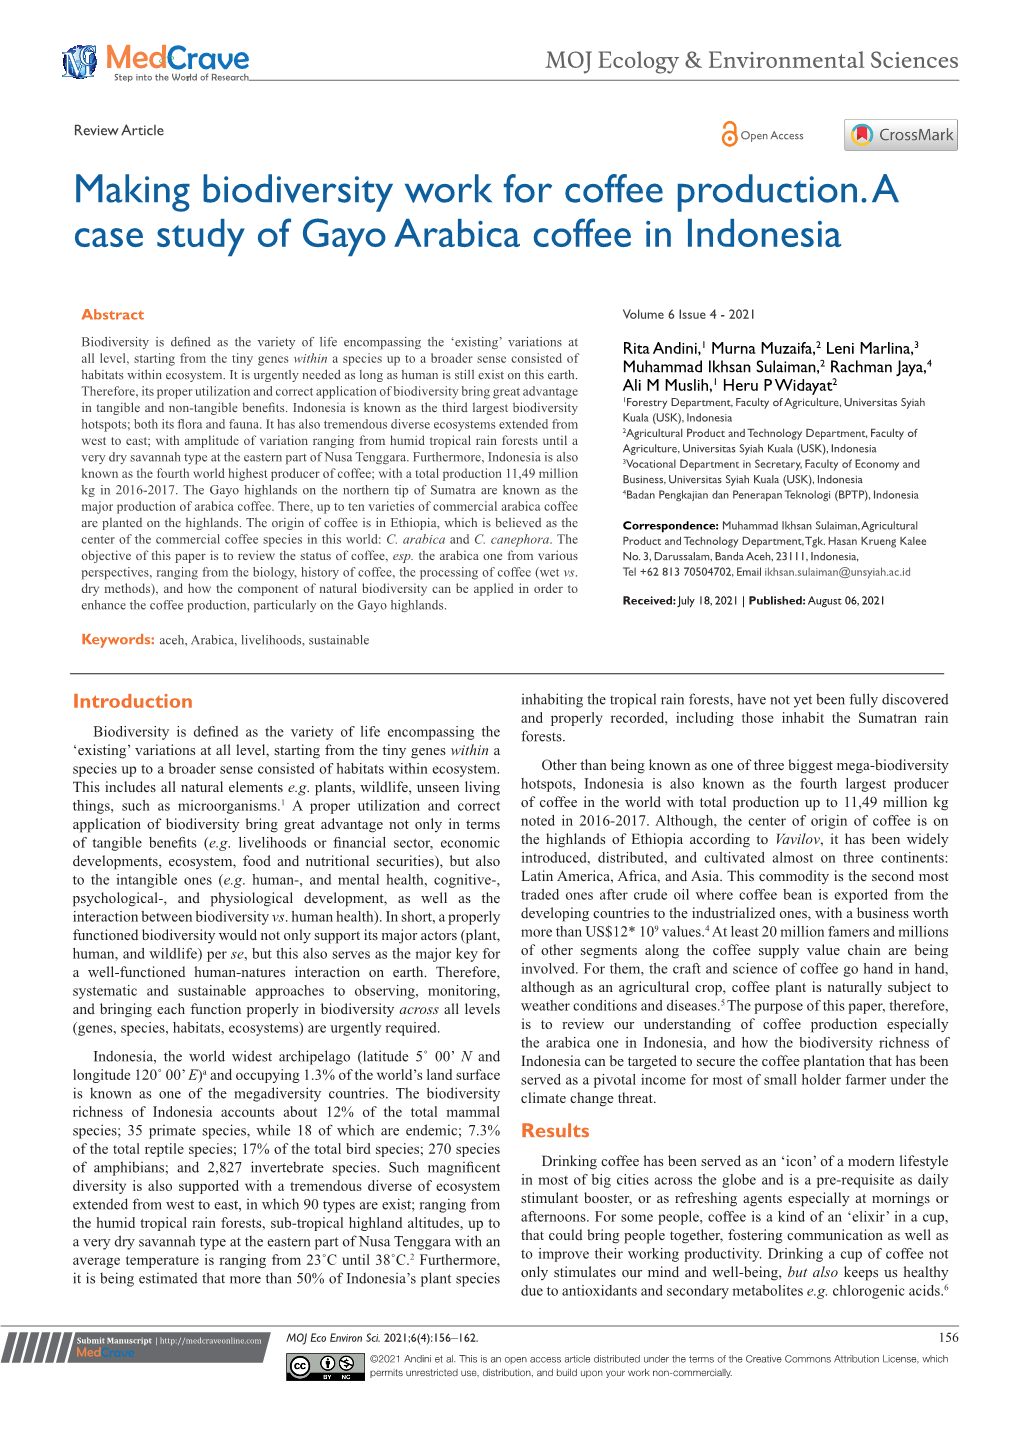 Making Biodiversity Work for Coffee Production. a Case Study of Gayo Arabica Coffee in Indonesia